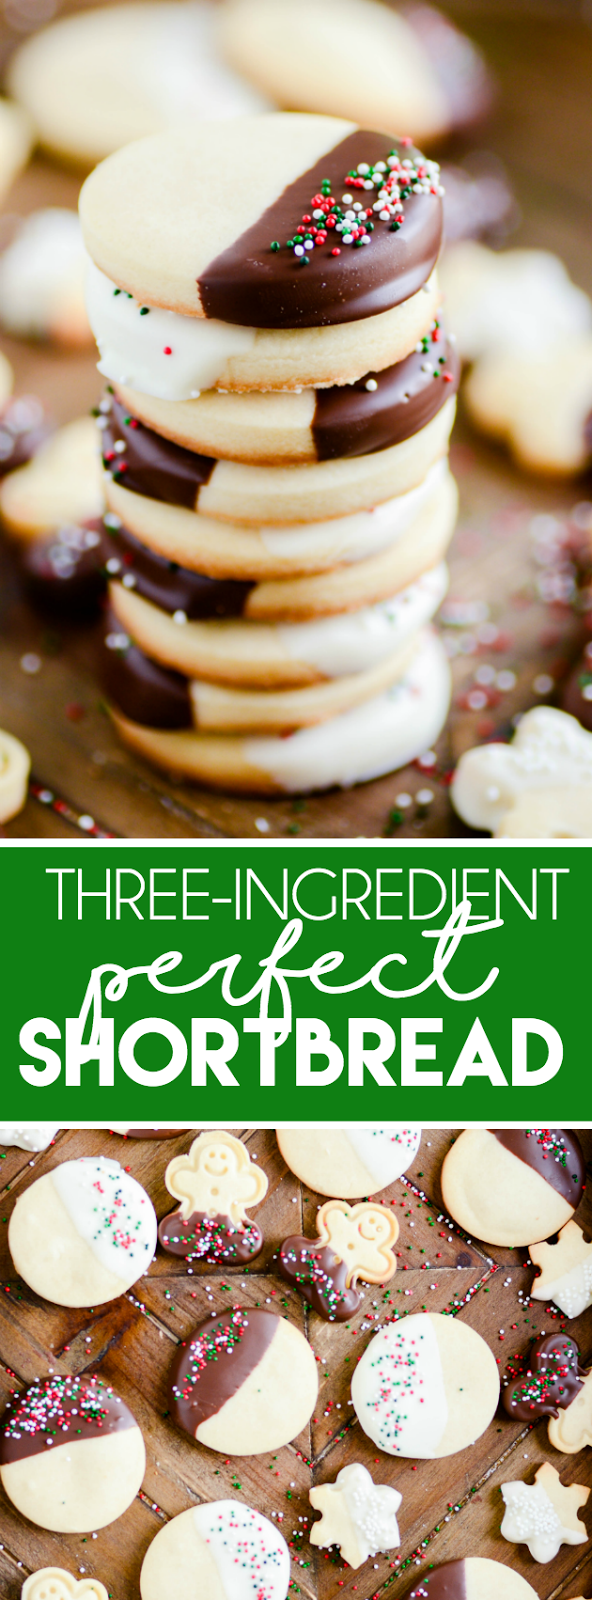 With just three, simple ingredients you can make a delicious, traditional shortbread. Dip it in chocolate and add sprinkles to make it extra festive!